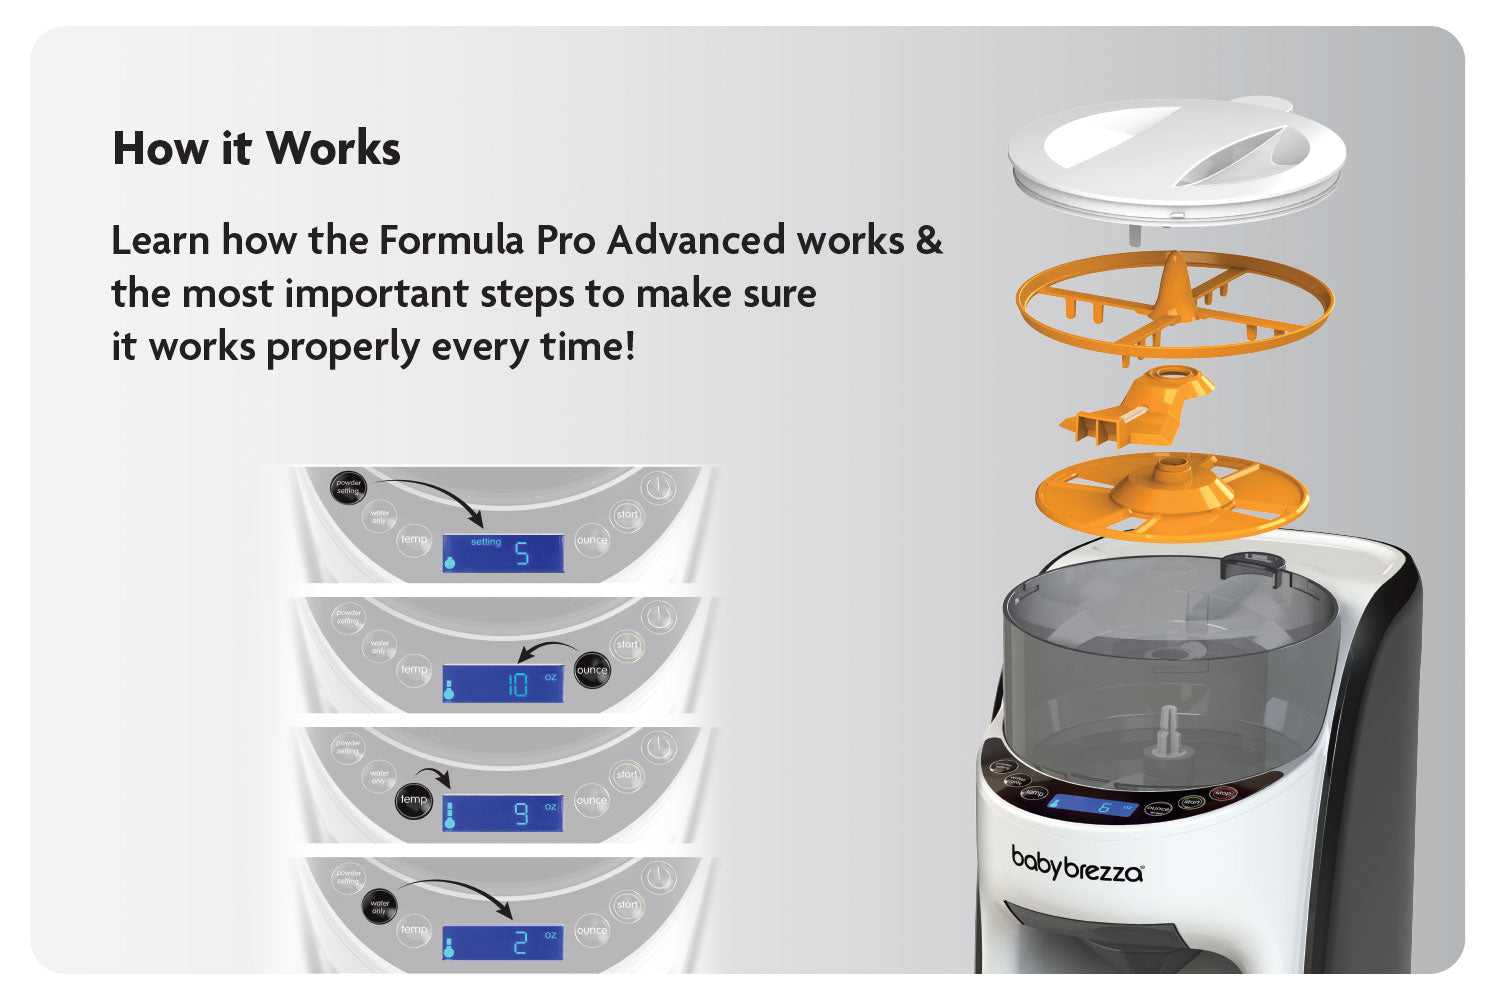 How It Works: Learn how the Formula Pro Advanced works & the most important steps to make sure it works properly every time! 